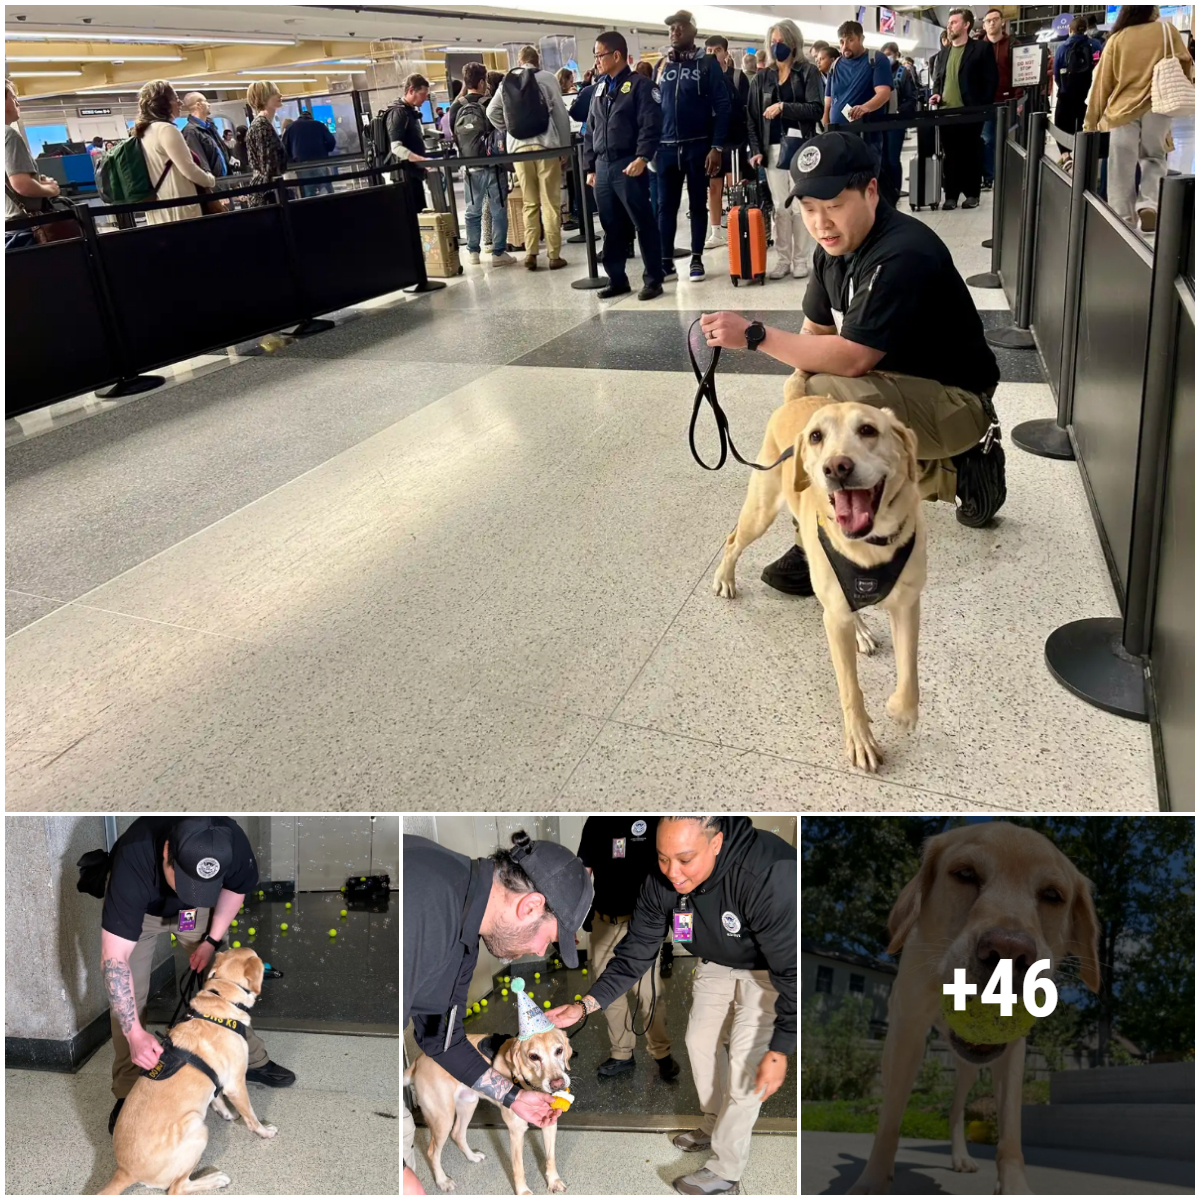 Memorable retirement ceremony of a Labrador dog, an employee of the Transportation Security Administration